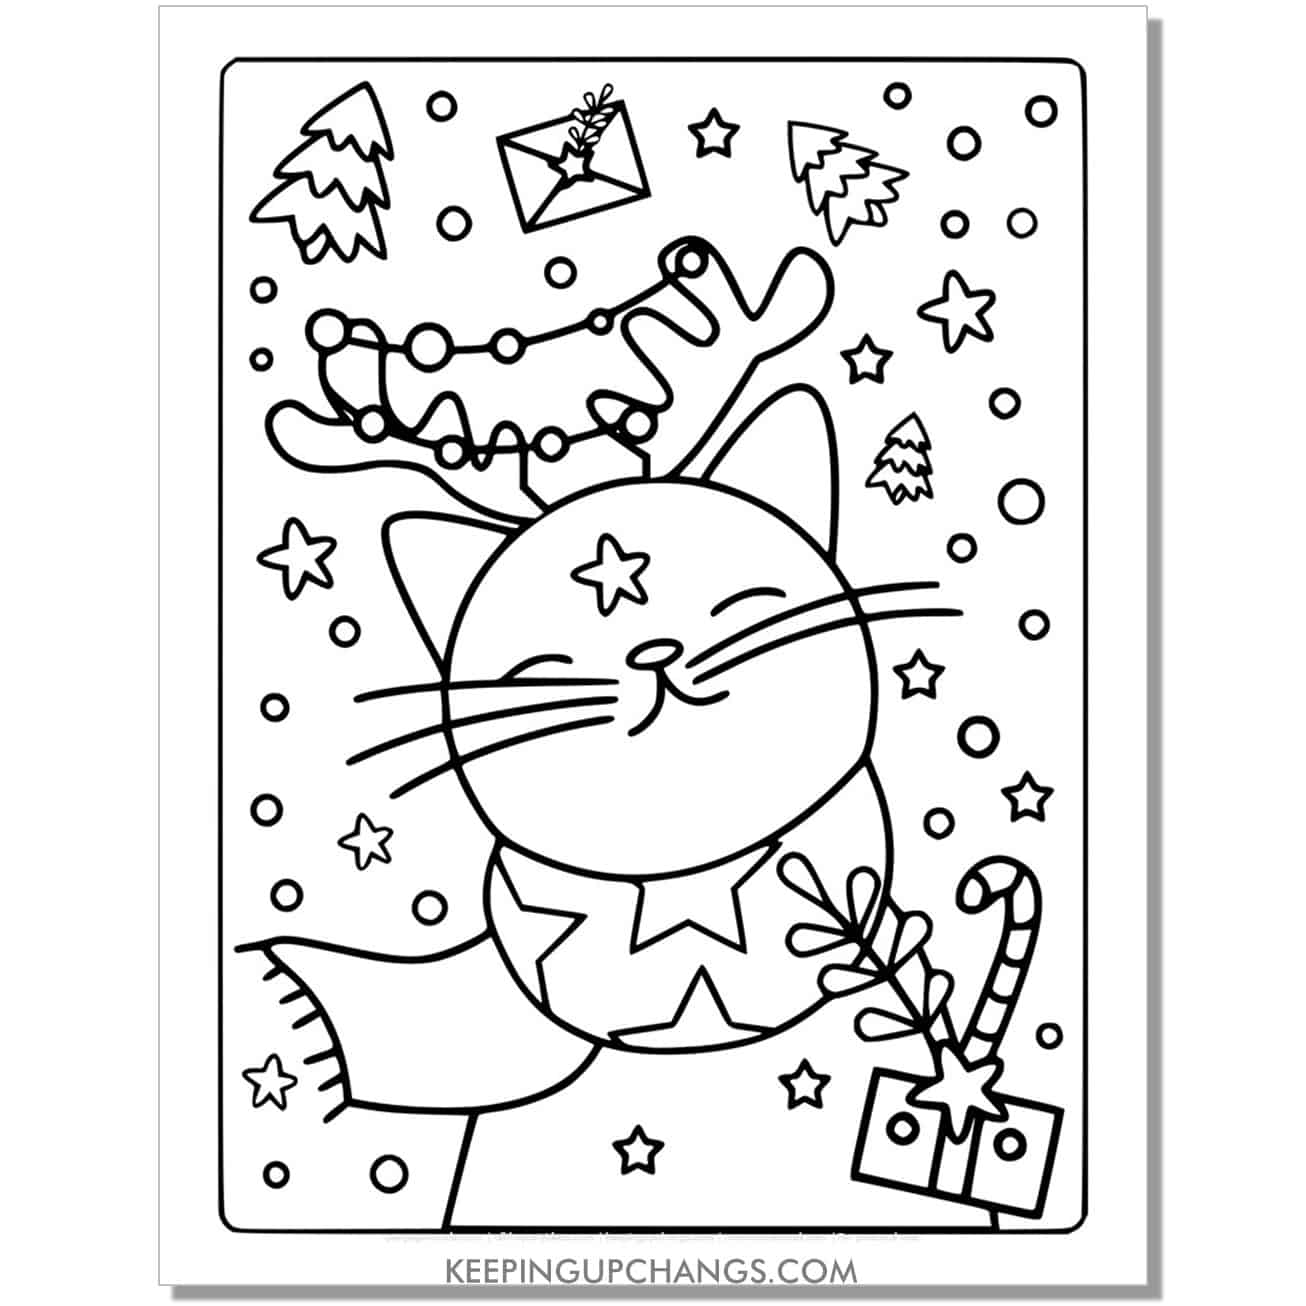 free christmas cat with reindeer antlers full size coloring page.